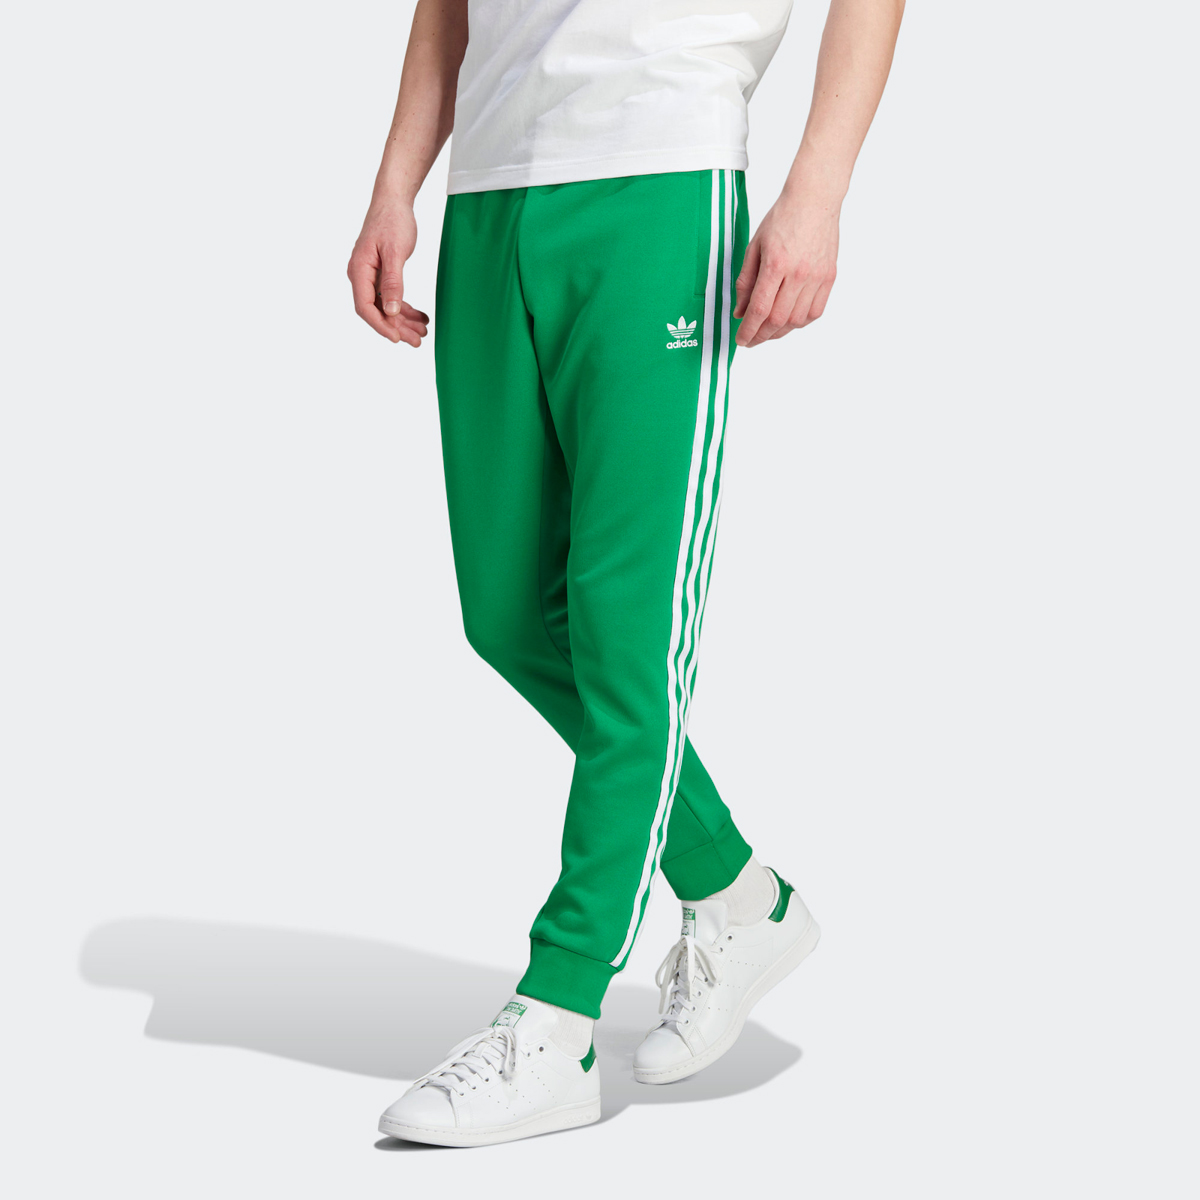 adidas Green Sneakers Clothing Outfits